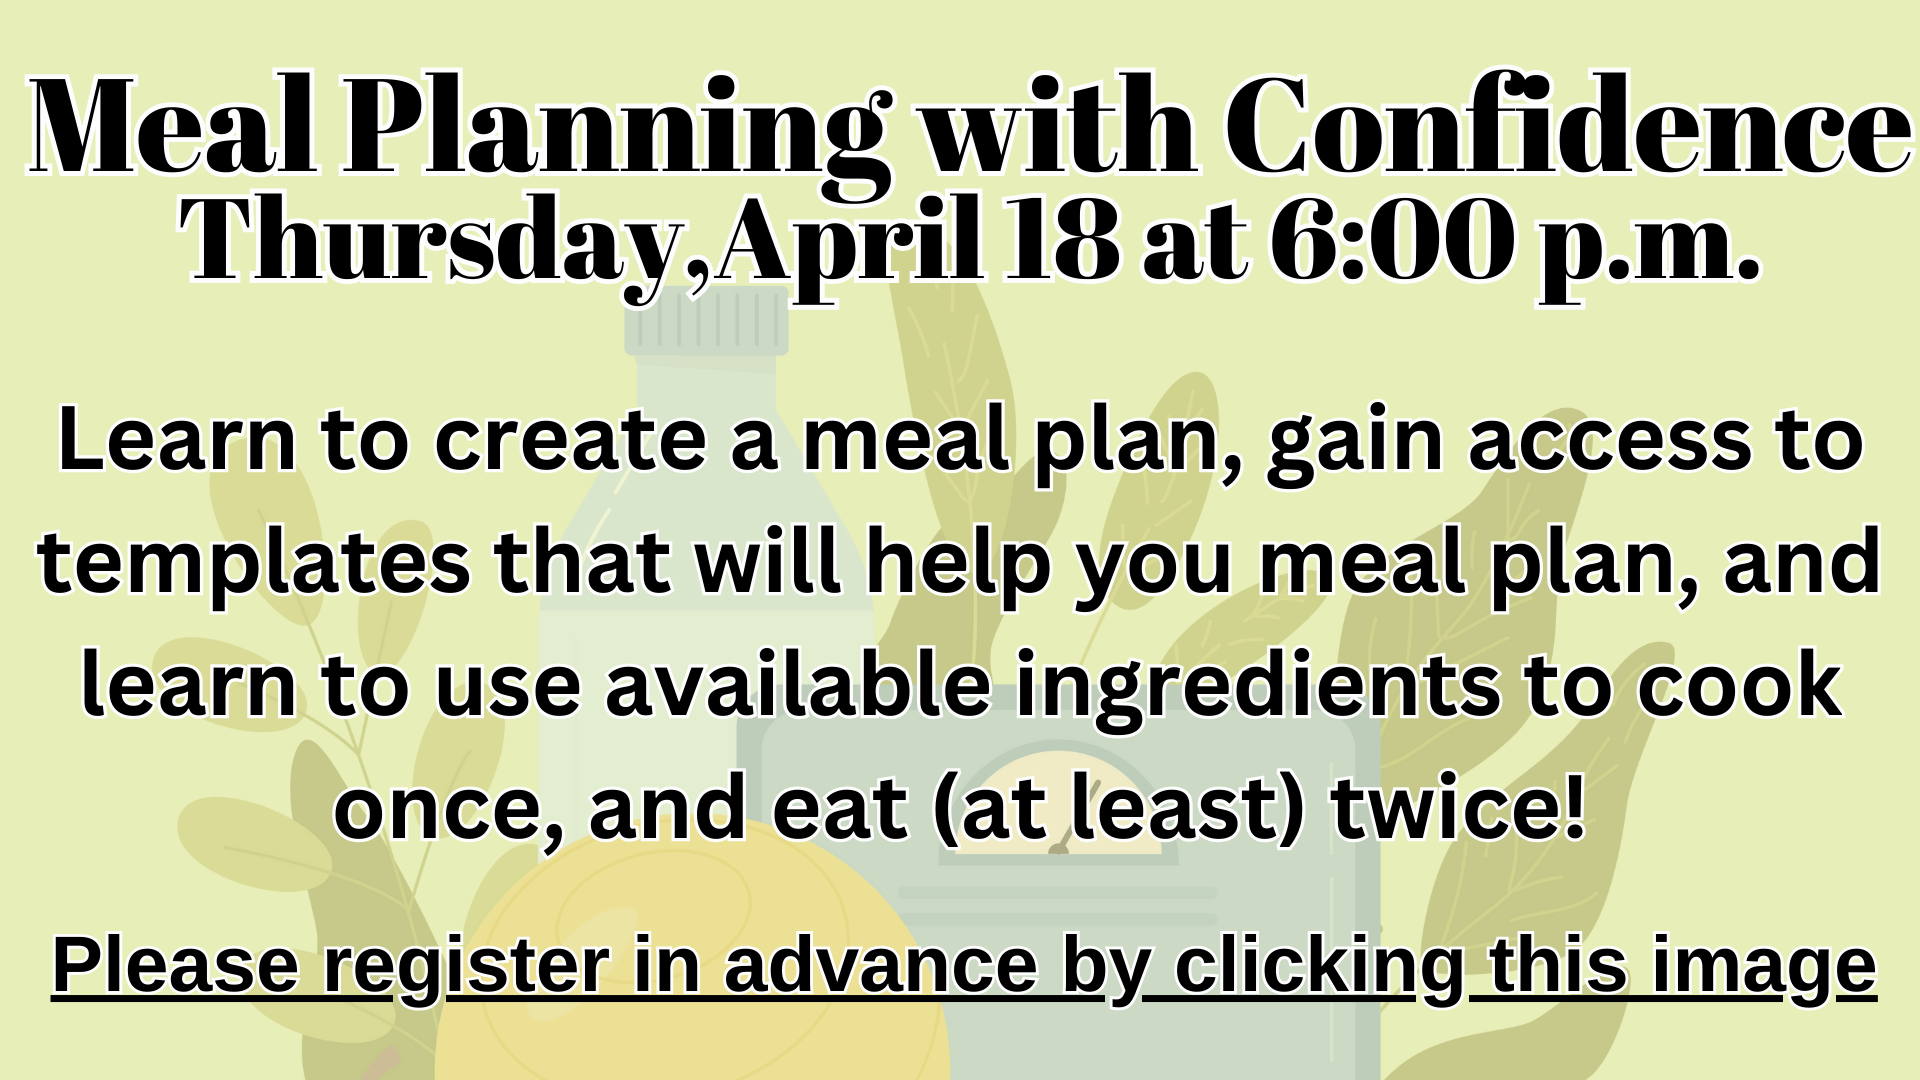 Meal planning with confidence, Thursday April 18 at 6pm. Please register in advance by clicking on this image